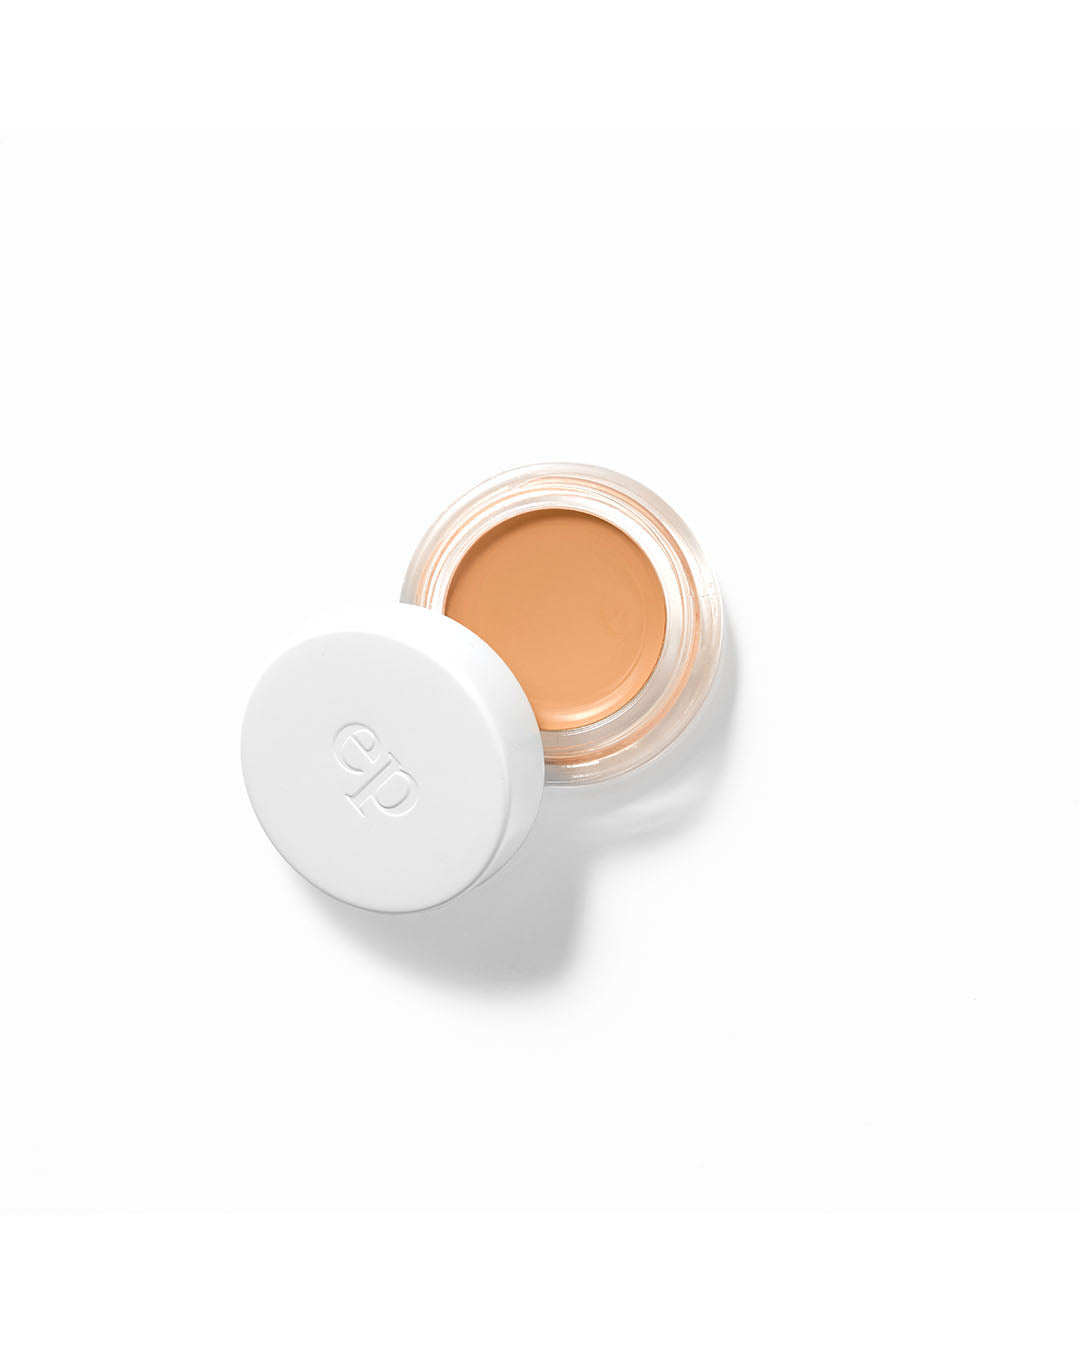 Arnica All-Cover Pot Makeup by Ere Perez - Prae Store